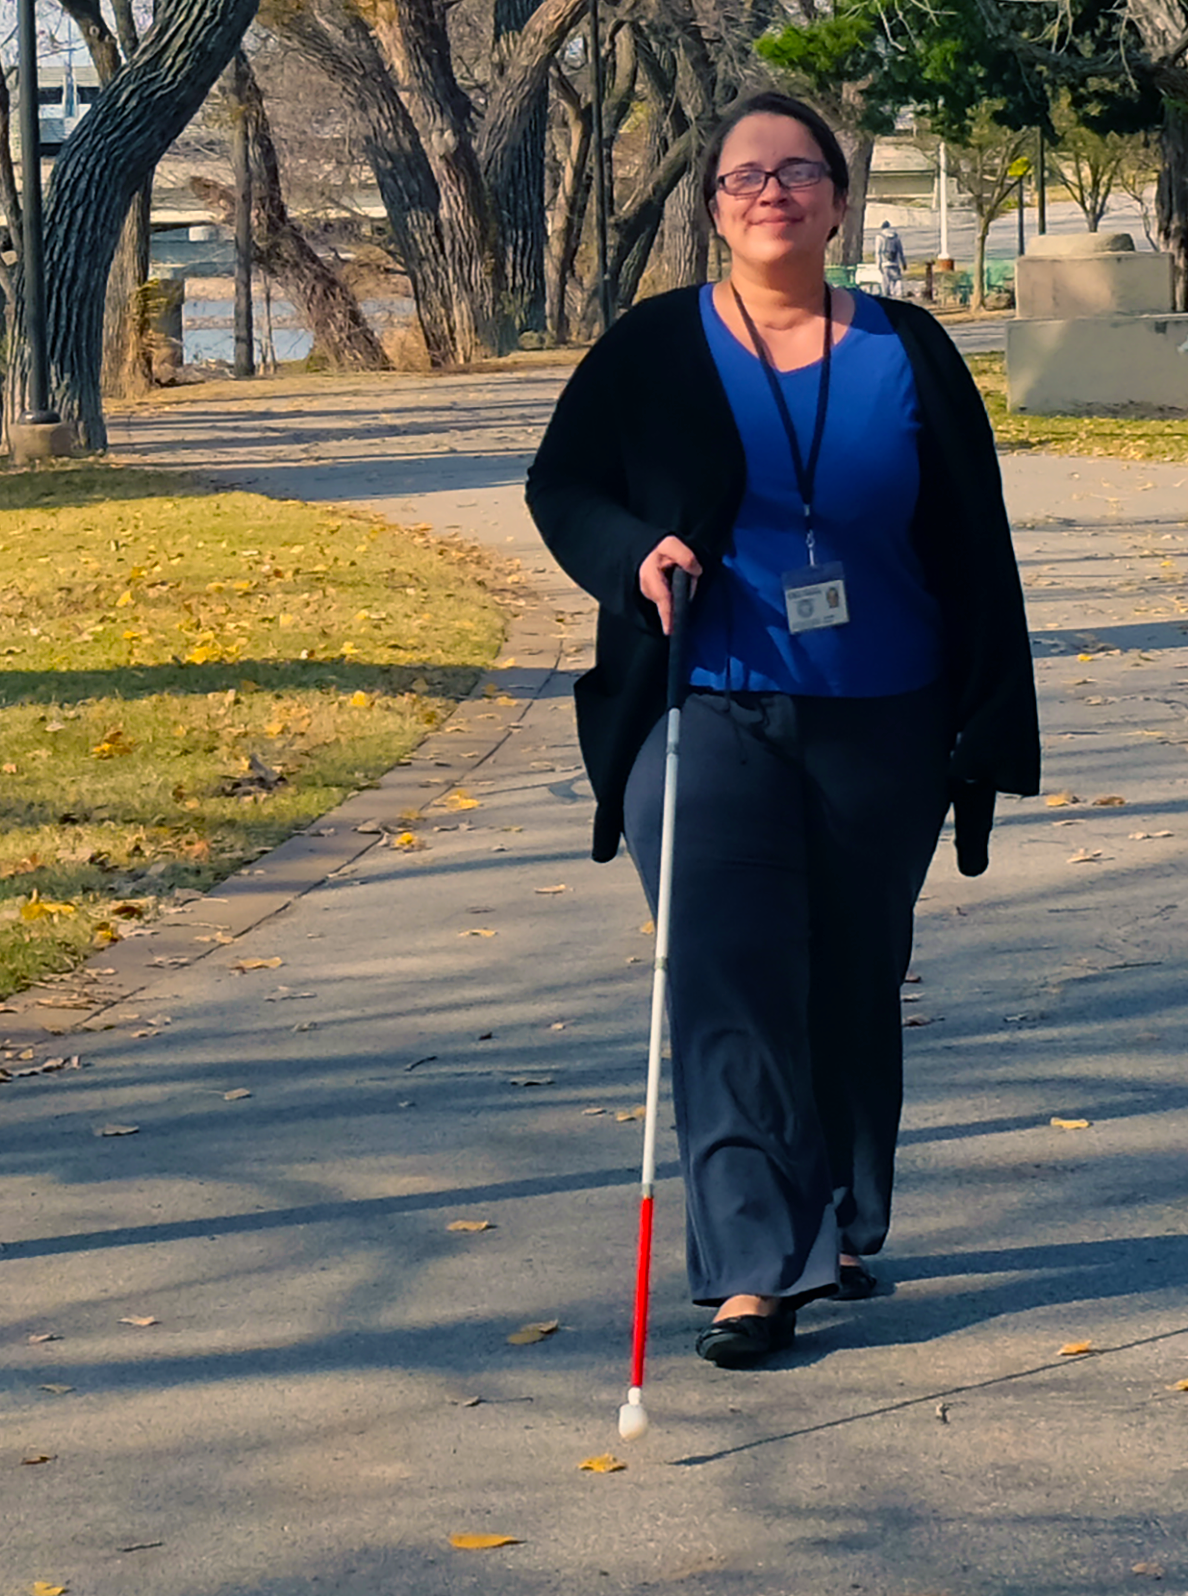 A woman who uses a white cane is walking outside.